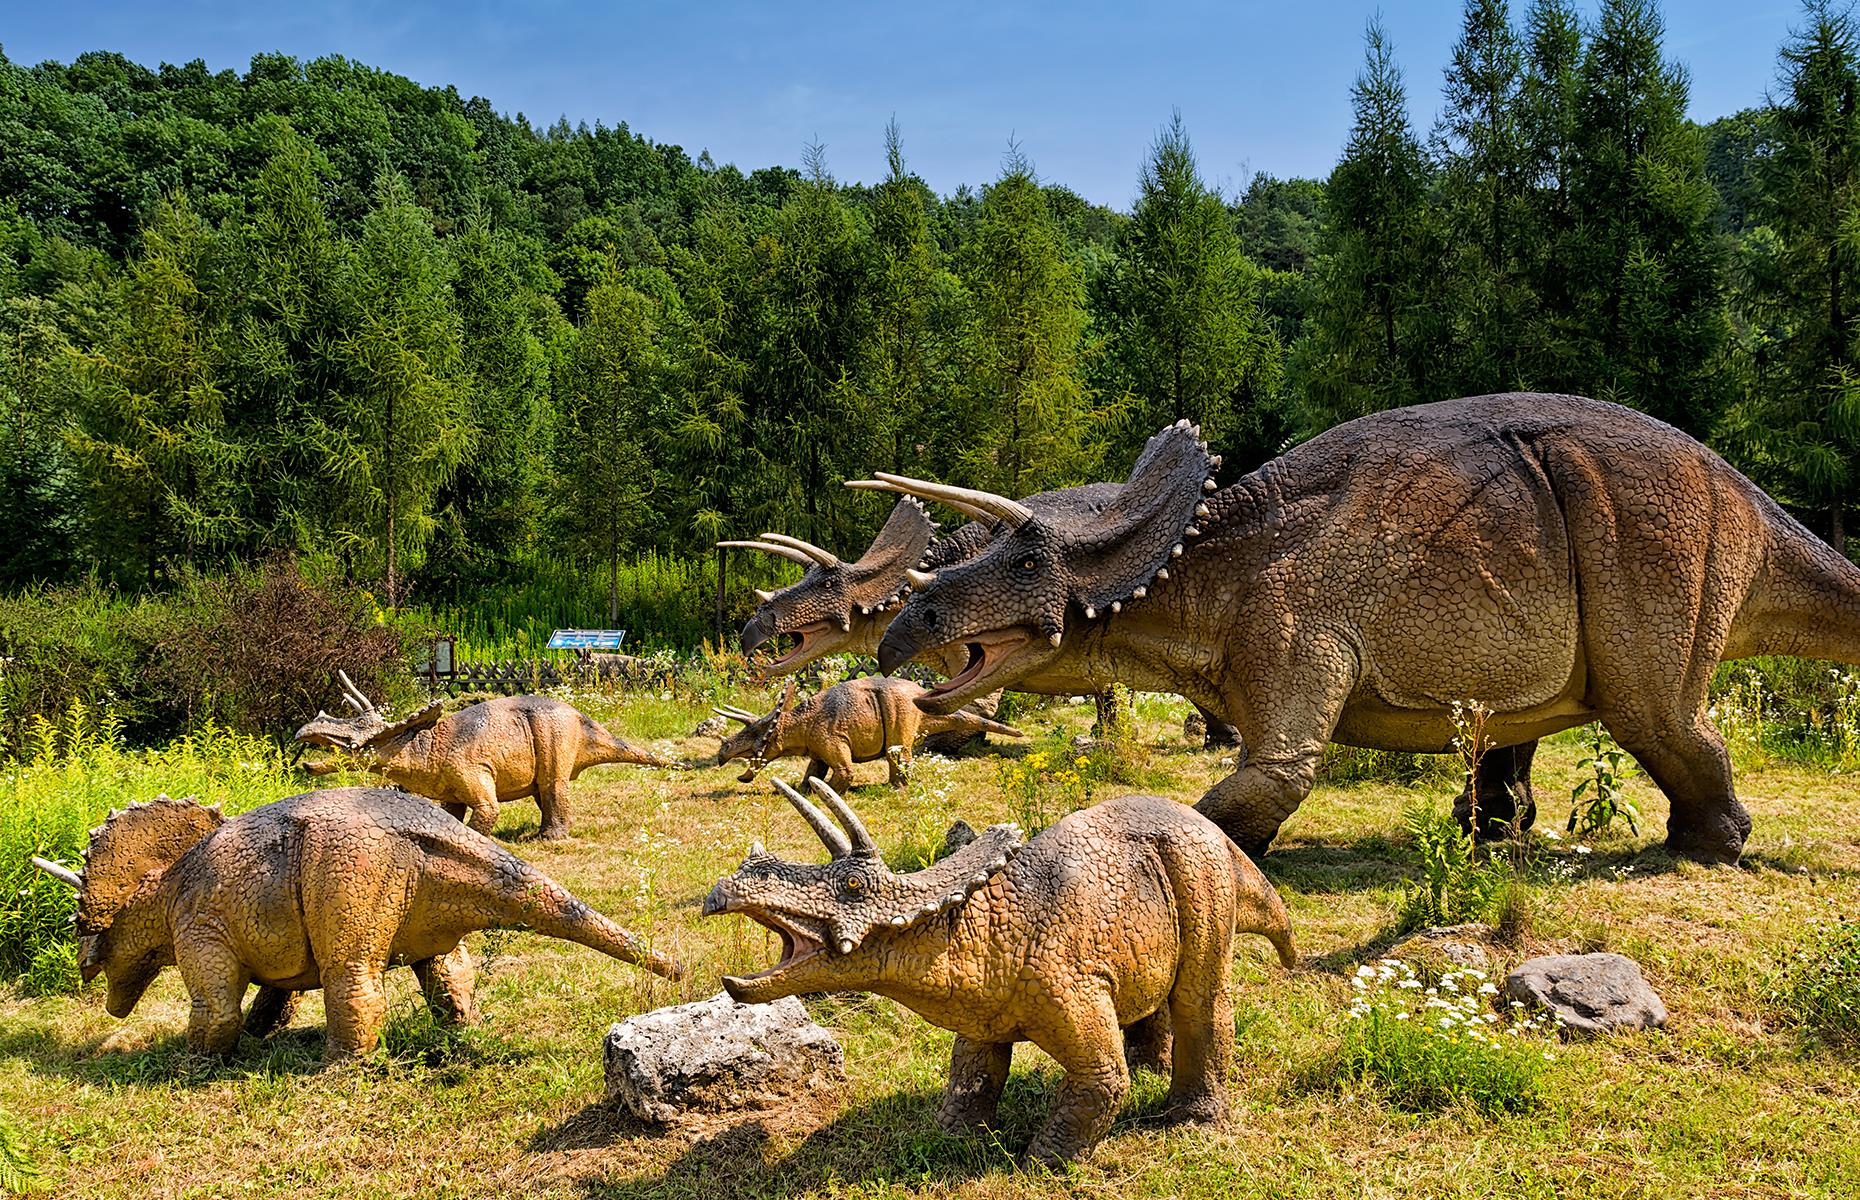 <p>You don’t have to love dinosaurs to love the sprawling <a href="https://juraparksolec.pl/">Baltow Jurassic Park</a>, but it certainly helps. Set in the Polish countryside, Europe’s largest dinosaur-themed park is a rather wonderful mix of natural history museum, woodland nature trails, playground and amusement park. With 100 life-size dinosaur models scattered around the grounds, it’s educational and fun, not to mention a great photo opportunity. Petite prehistorians will adore the prehistoric aquarium, an audiovisual experience that brings you face-to-face with a 65-foot (20m) megalodon shark. There's also a European bison safari, in case you want to see real-life animals.</p>